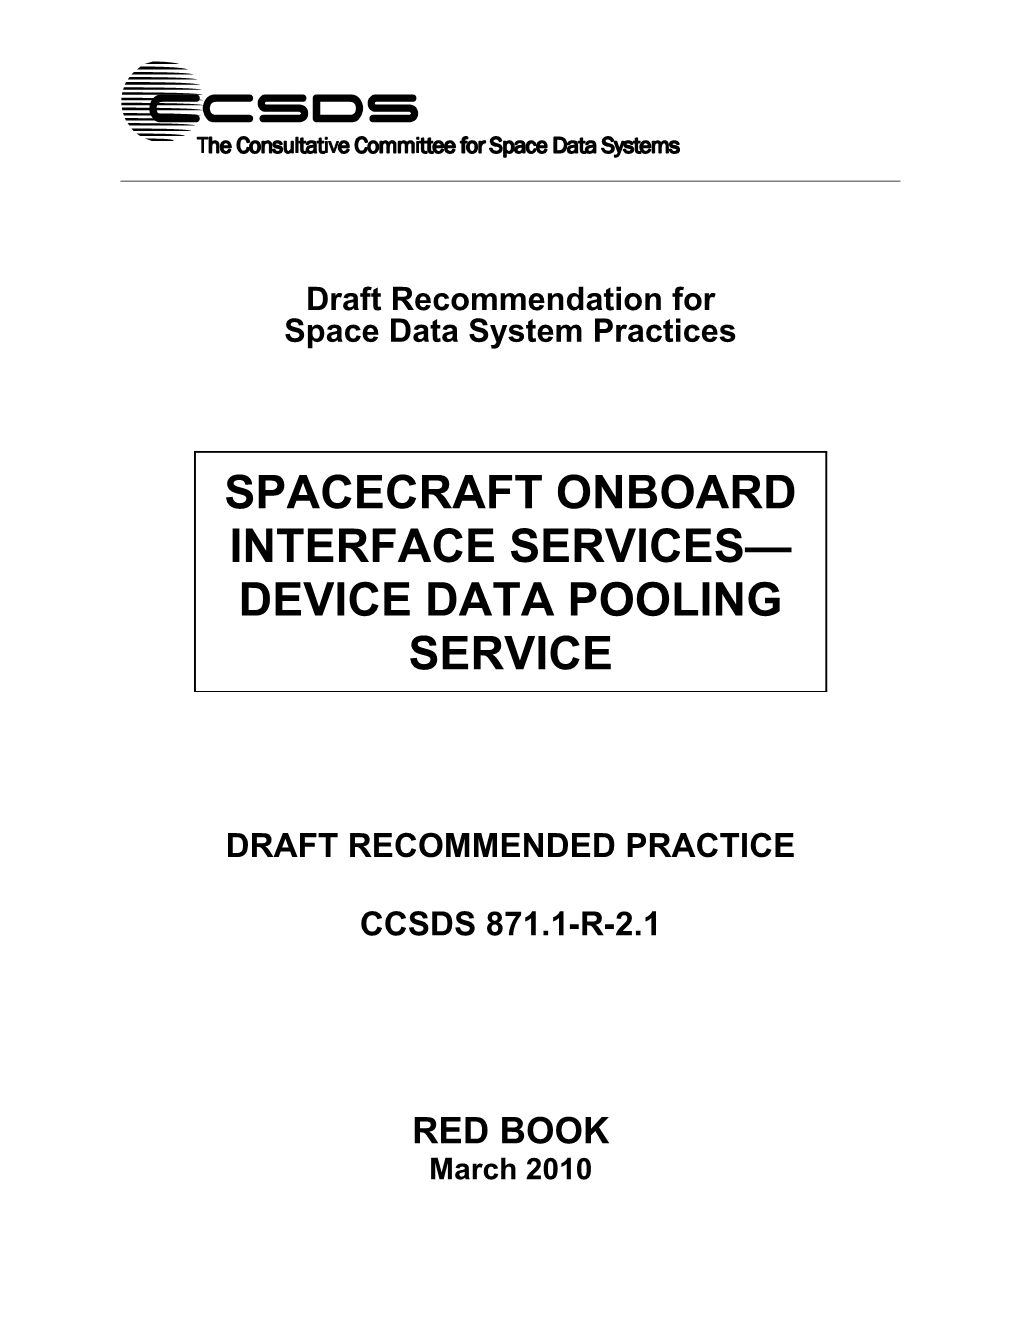 Spacecraft Onboard Interface Services Device Data Pooling Service